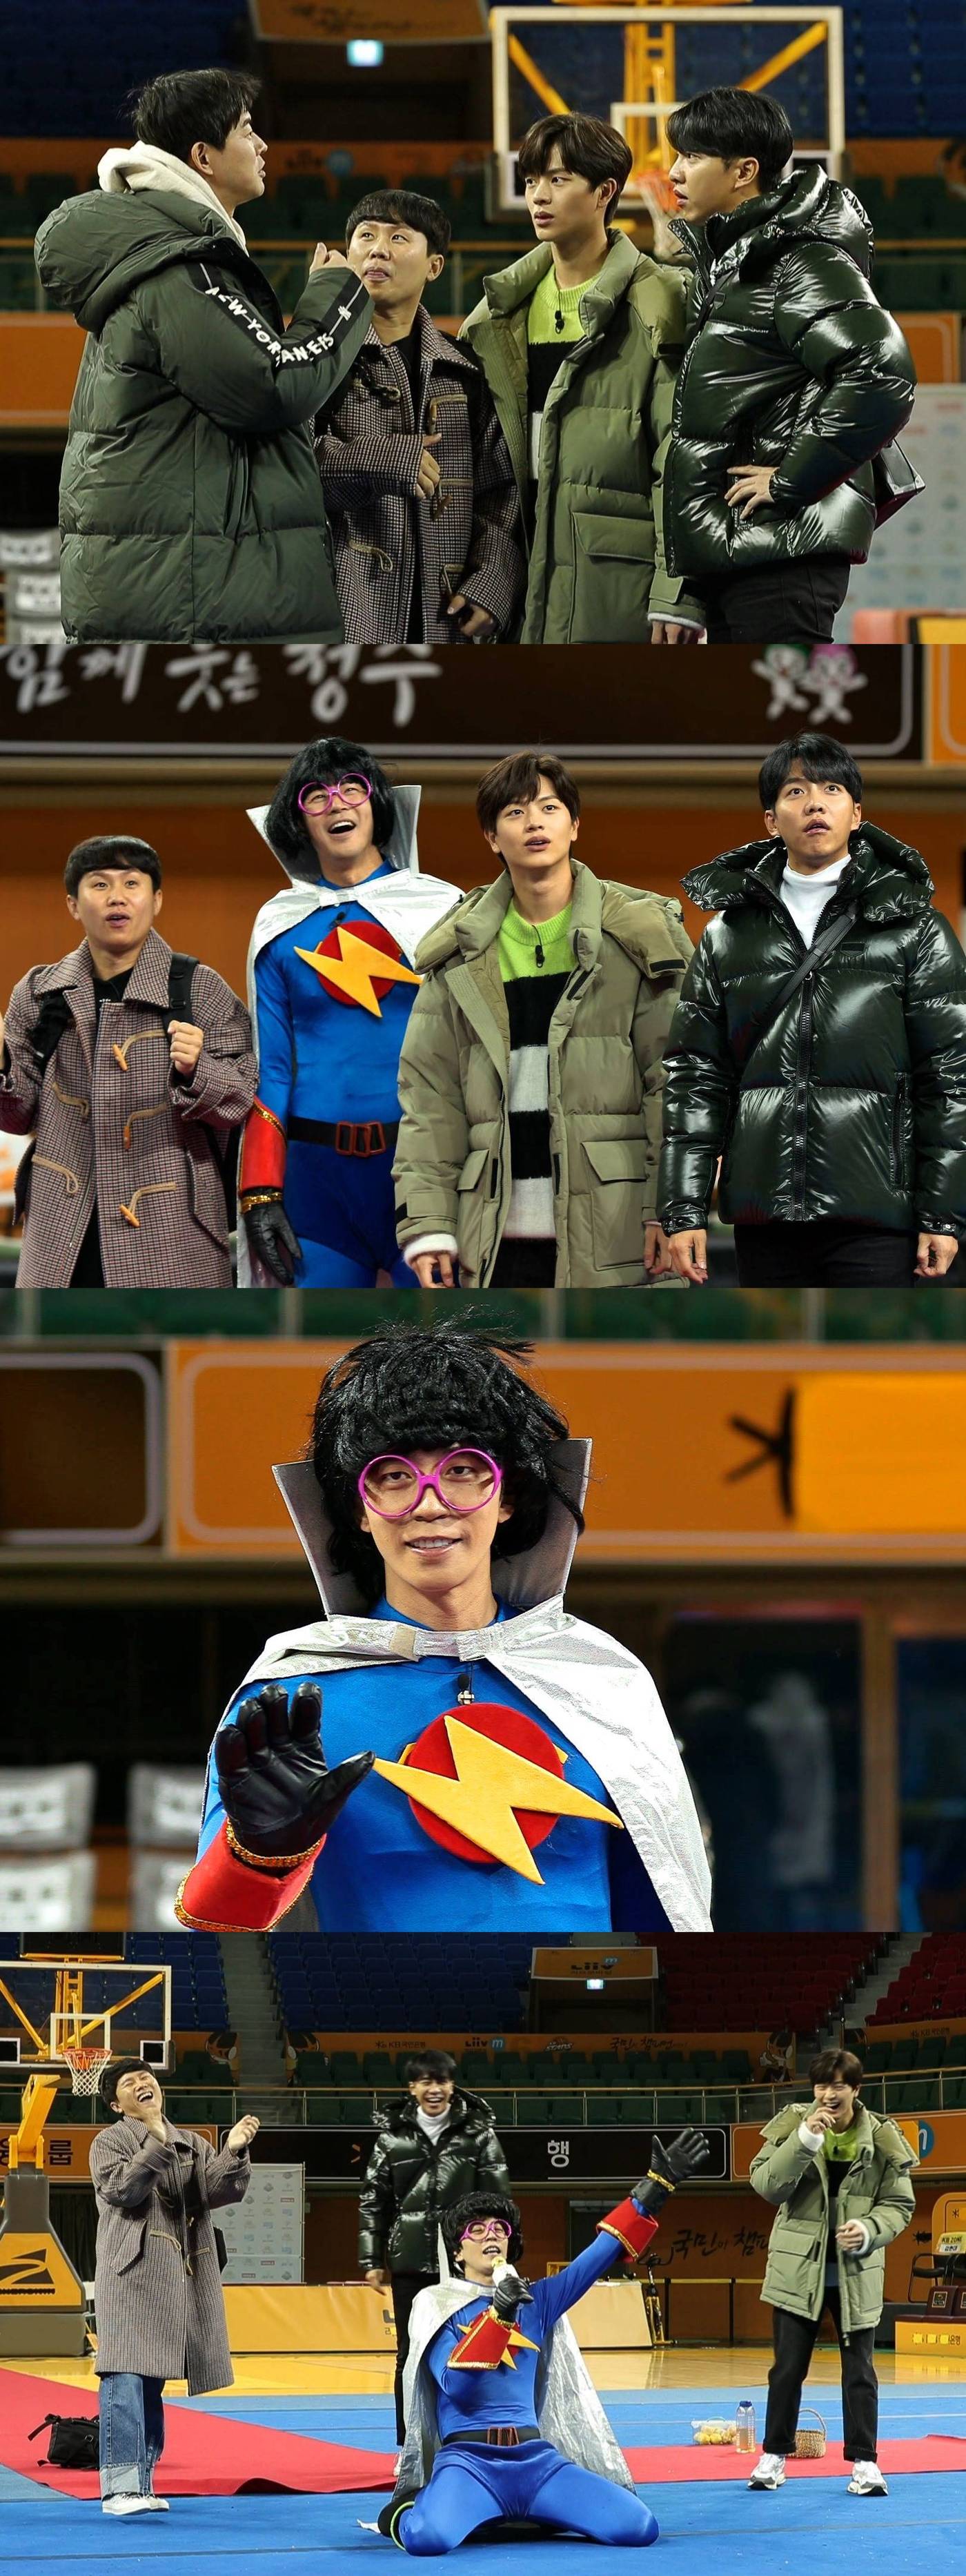 Seoul = = The new member finally appears in All The Butlers.SBS All The Butlers, which will be broadcasted at 6:25 pm on December 12, will unveil the unusual fun sense of the new member Shin Sung-rok.In the 2019 SBS Entertainment Grand Prize, Lee Seung-gi predicted the joining of the new member, and All The Butlers new member was the first in real-time search terms.Shin Sung-rok, the main character of the topic, received the expectation of all people and appeared at the first shooting scene as a fixed member of All The Butlers.He showed explosive fun sense from the appearance and embarrassed Lee Seung-gi, Lee Sang-yoon, Yang Sung-jae and Yang Se-hyeong.The members conducted entertainment attribute tutoring such as Gwanggae Man, New Lemon Eating and Persistence to show entertainment taste to Shin Sung-rok.However, unlike the members expectations, Shin Sung-rok said, It is so fun. The members were in a great shock.Yang Se-hyeong shouted, I am crazy even if I am crazy, and laughed at his relaxed appearance.Members who have already felt a sense of crisis in the entertainment new Shin Sung-rok, which is close to pro, are the back door of the emergency meeting.The explosive Fun sense of Shin Sung-rok, a newly appeared Passion Mansour, can be found at All The Butlers broadcasted at 6:25 pm on the day.